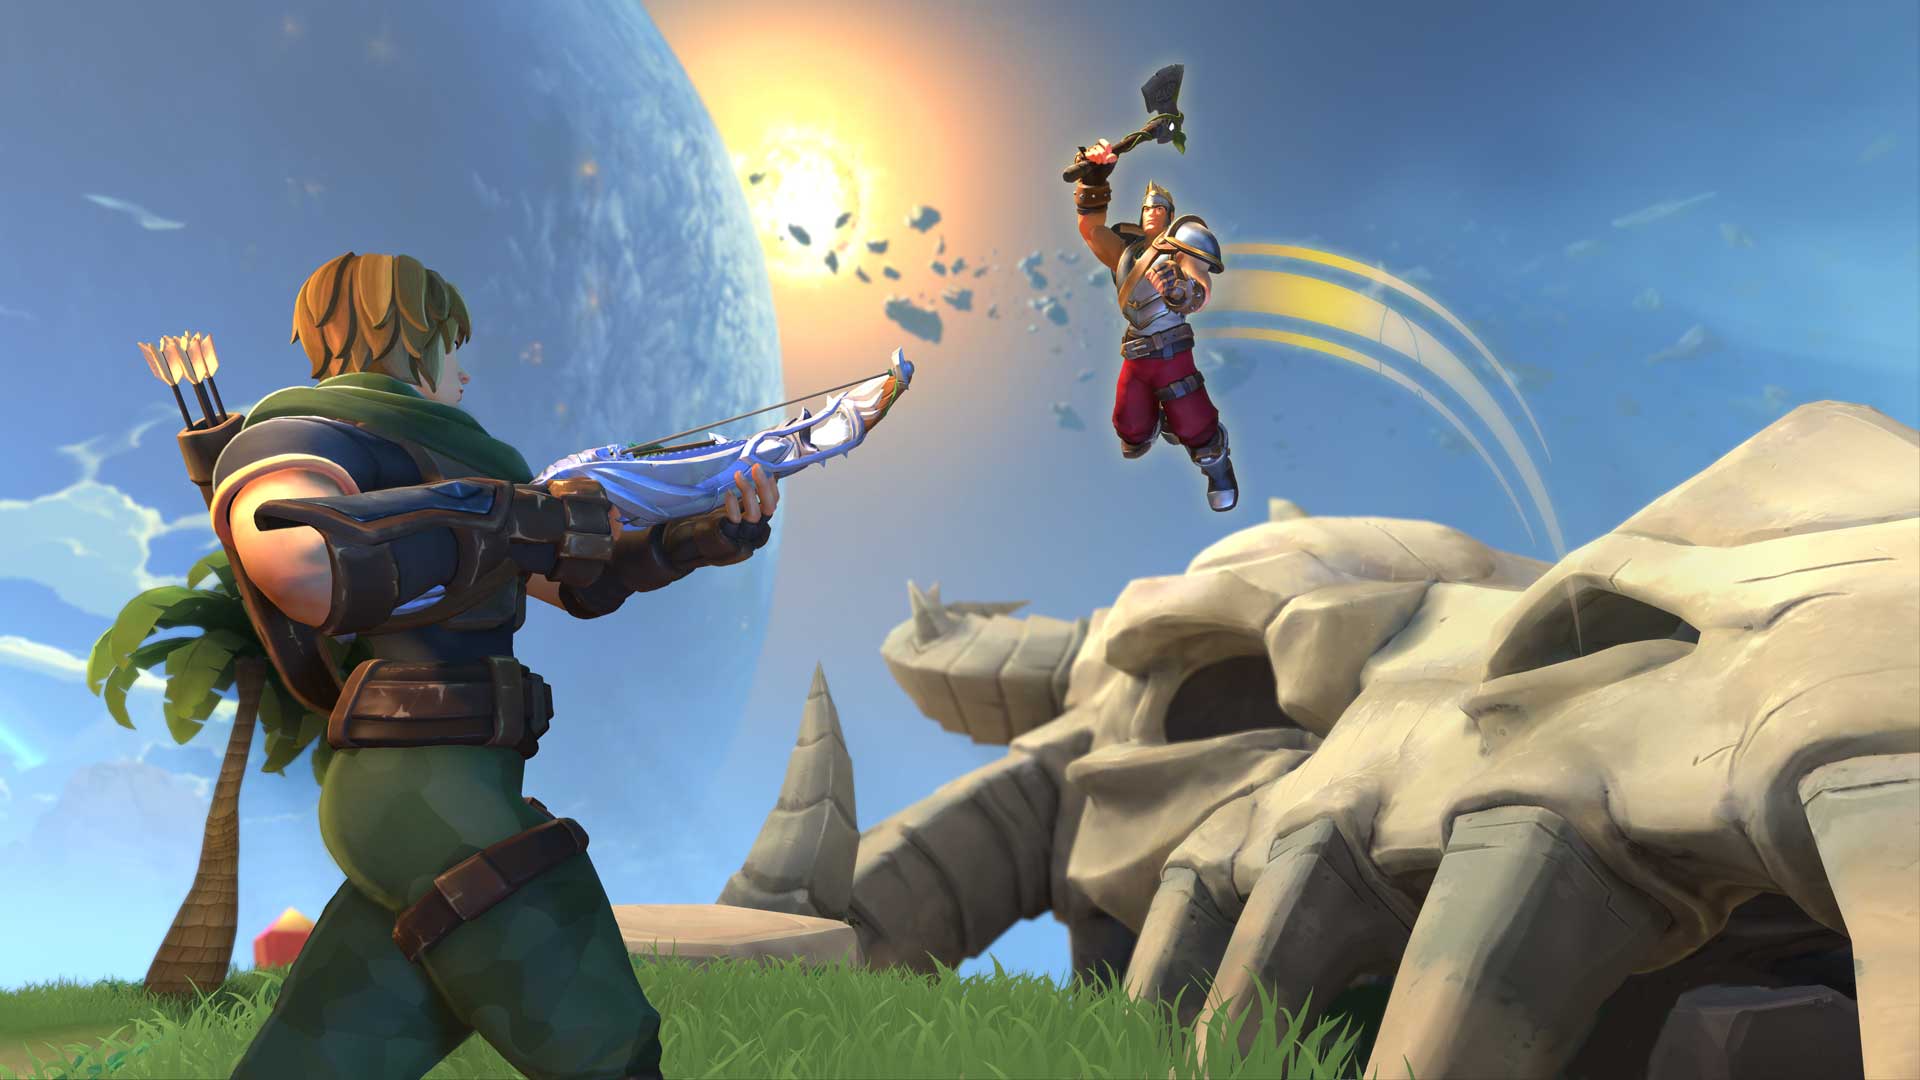 Realm Royale goes into open beta on PS4 and Xbox One tomorrow